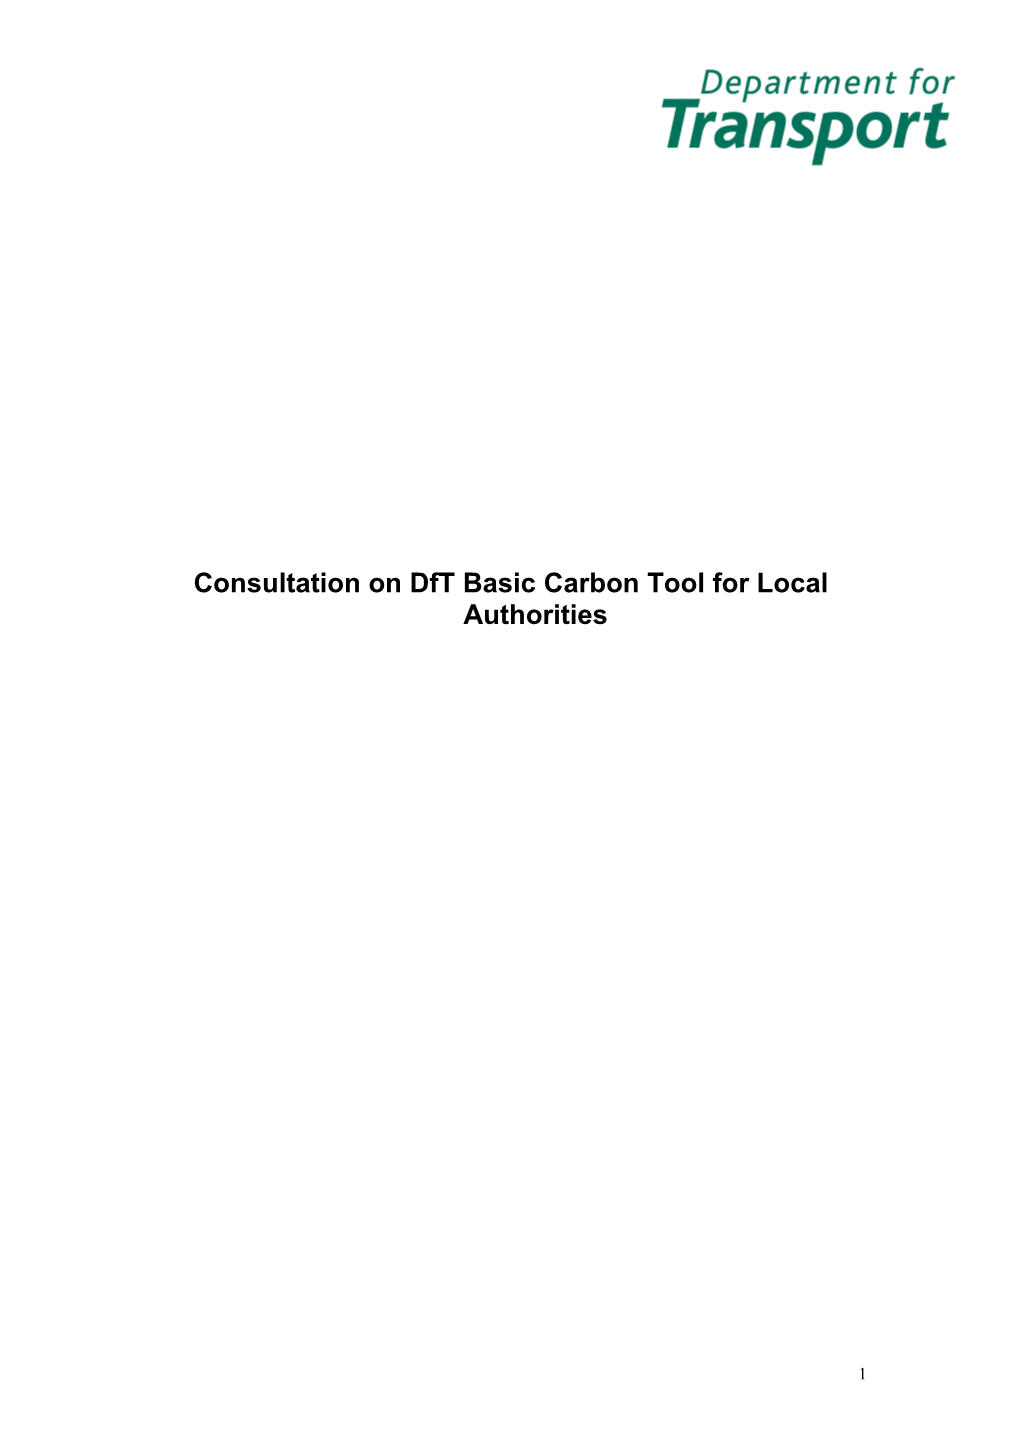 Consultation on Dft Basic Carbon Tool for Local Authorities